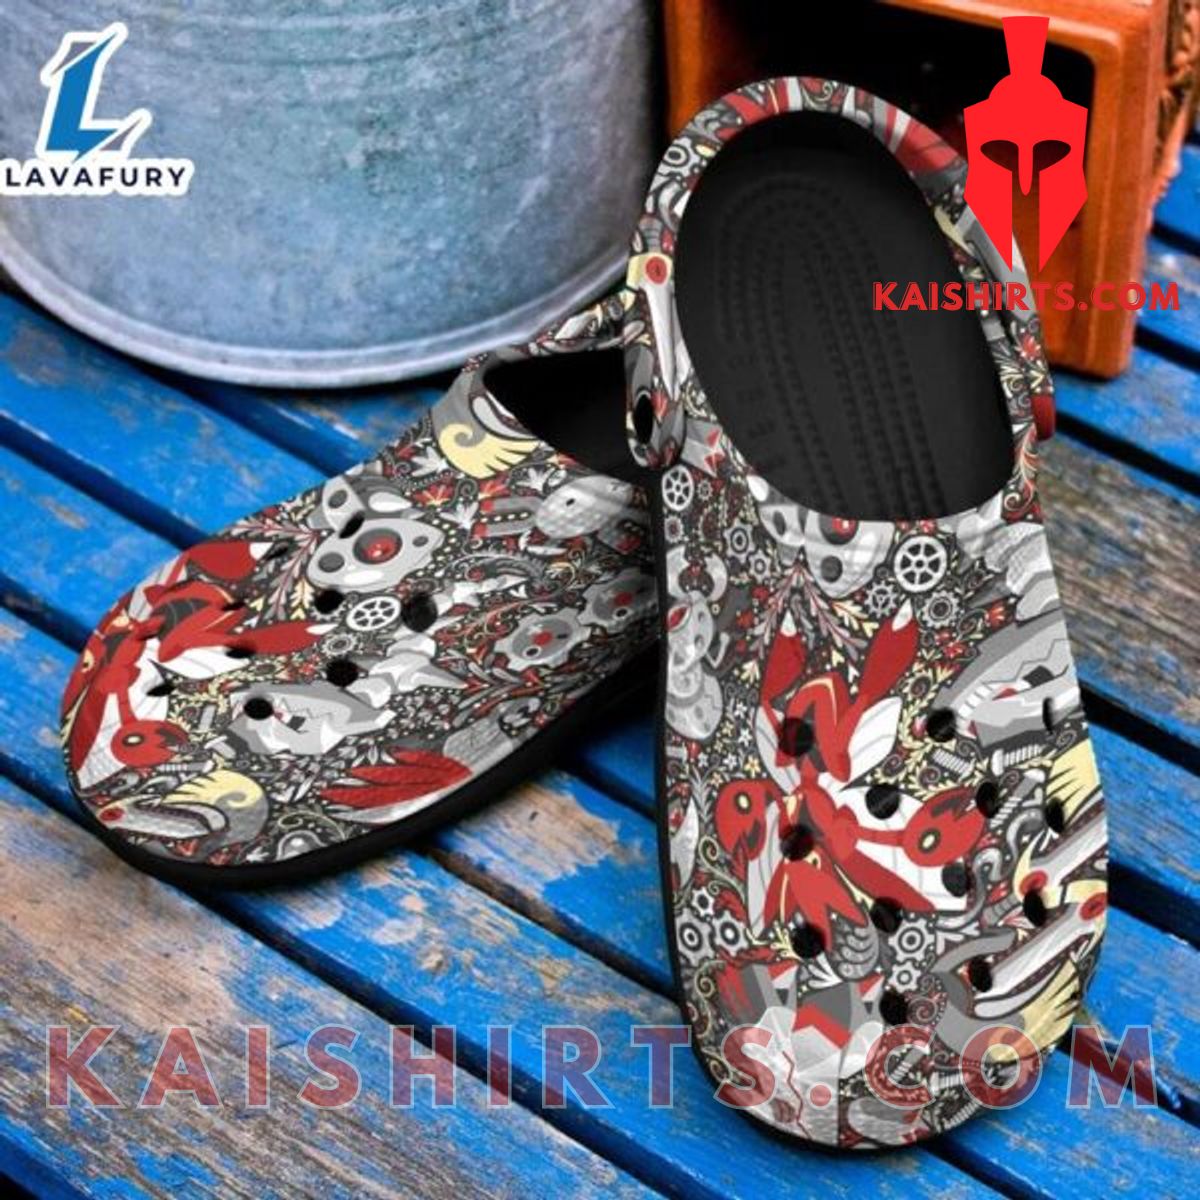 Pokemon Steel Anime Pattern Crocs Classic Clogs Shoes In Red Gray